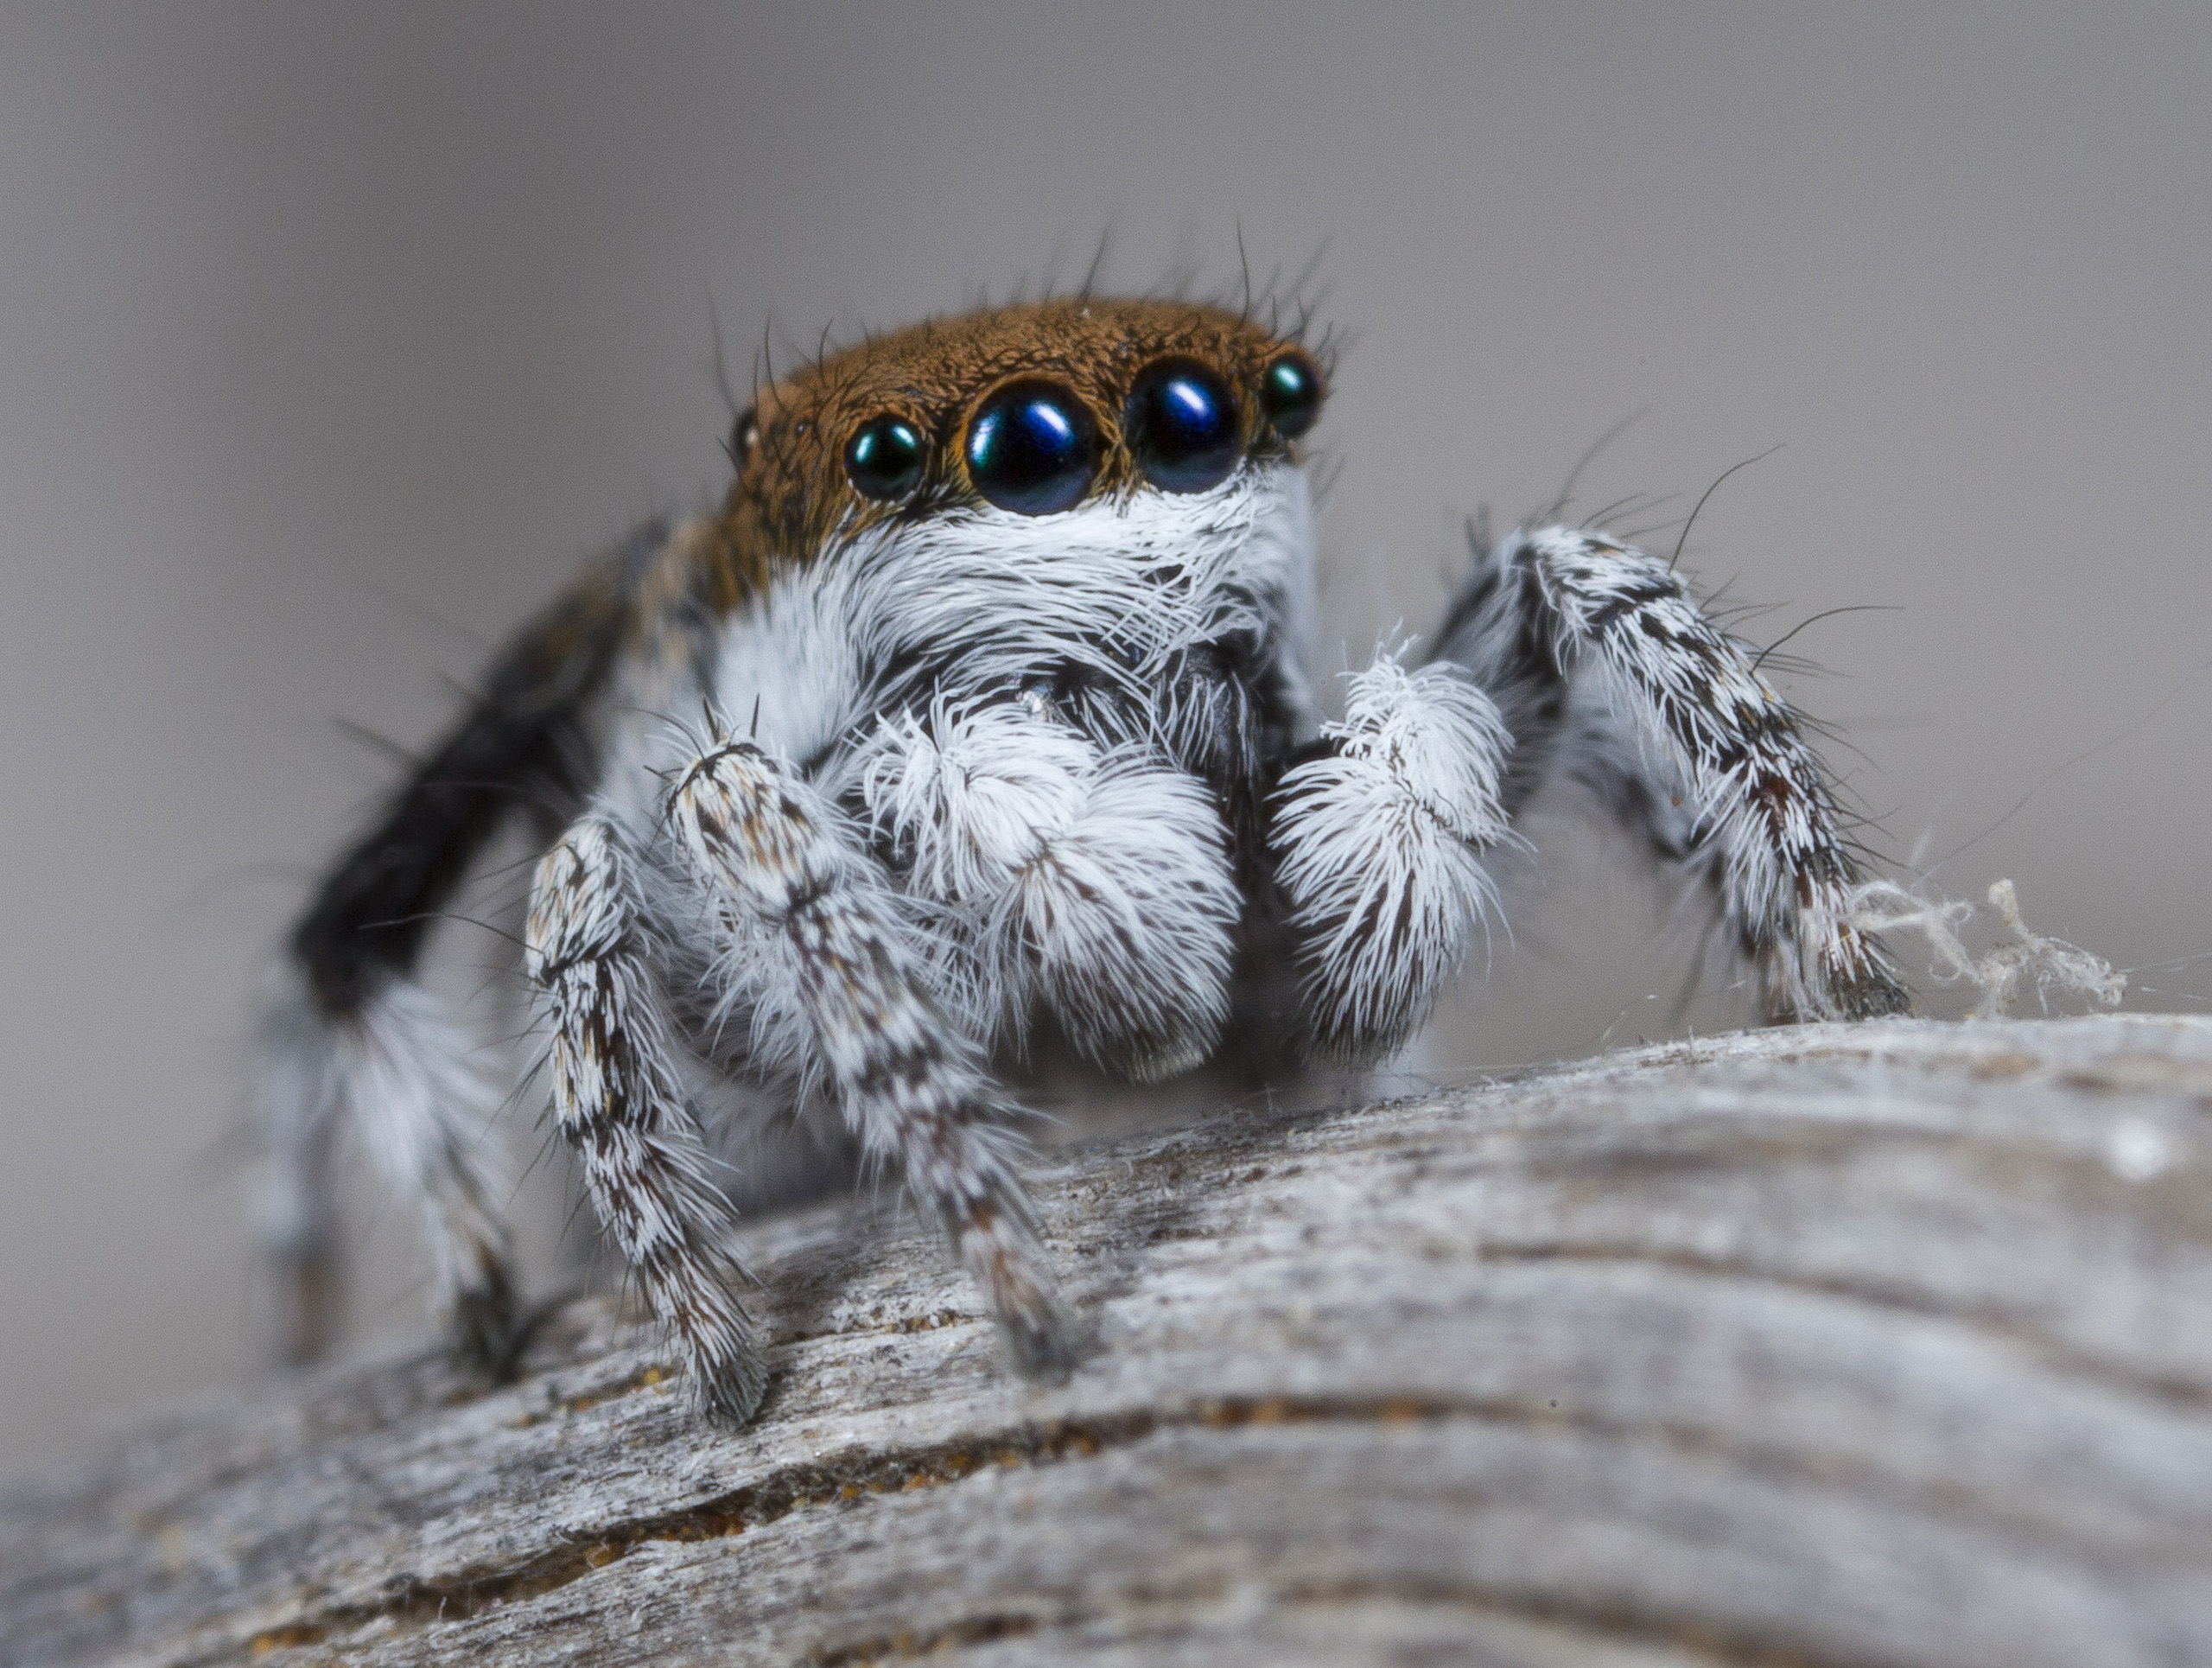 Popularity Of Cute Spiders